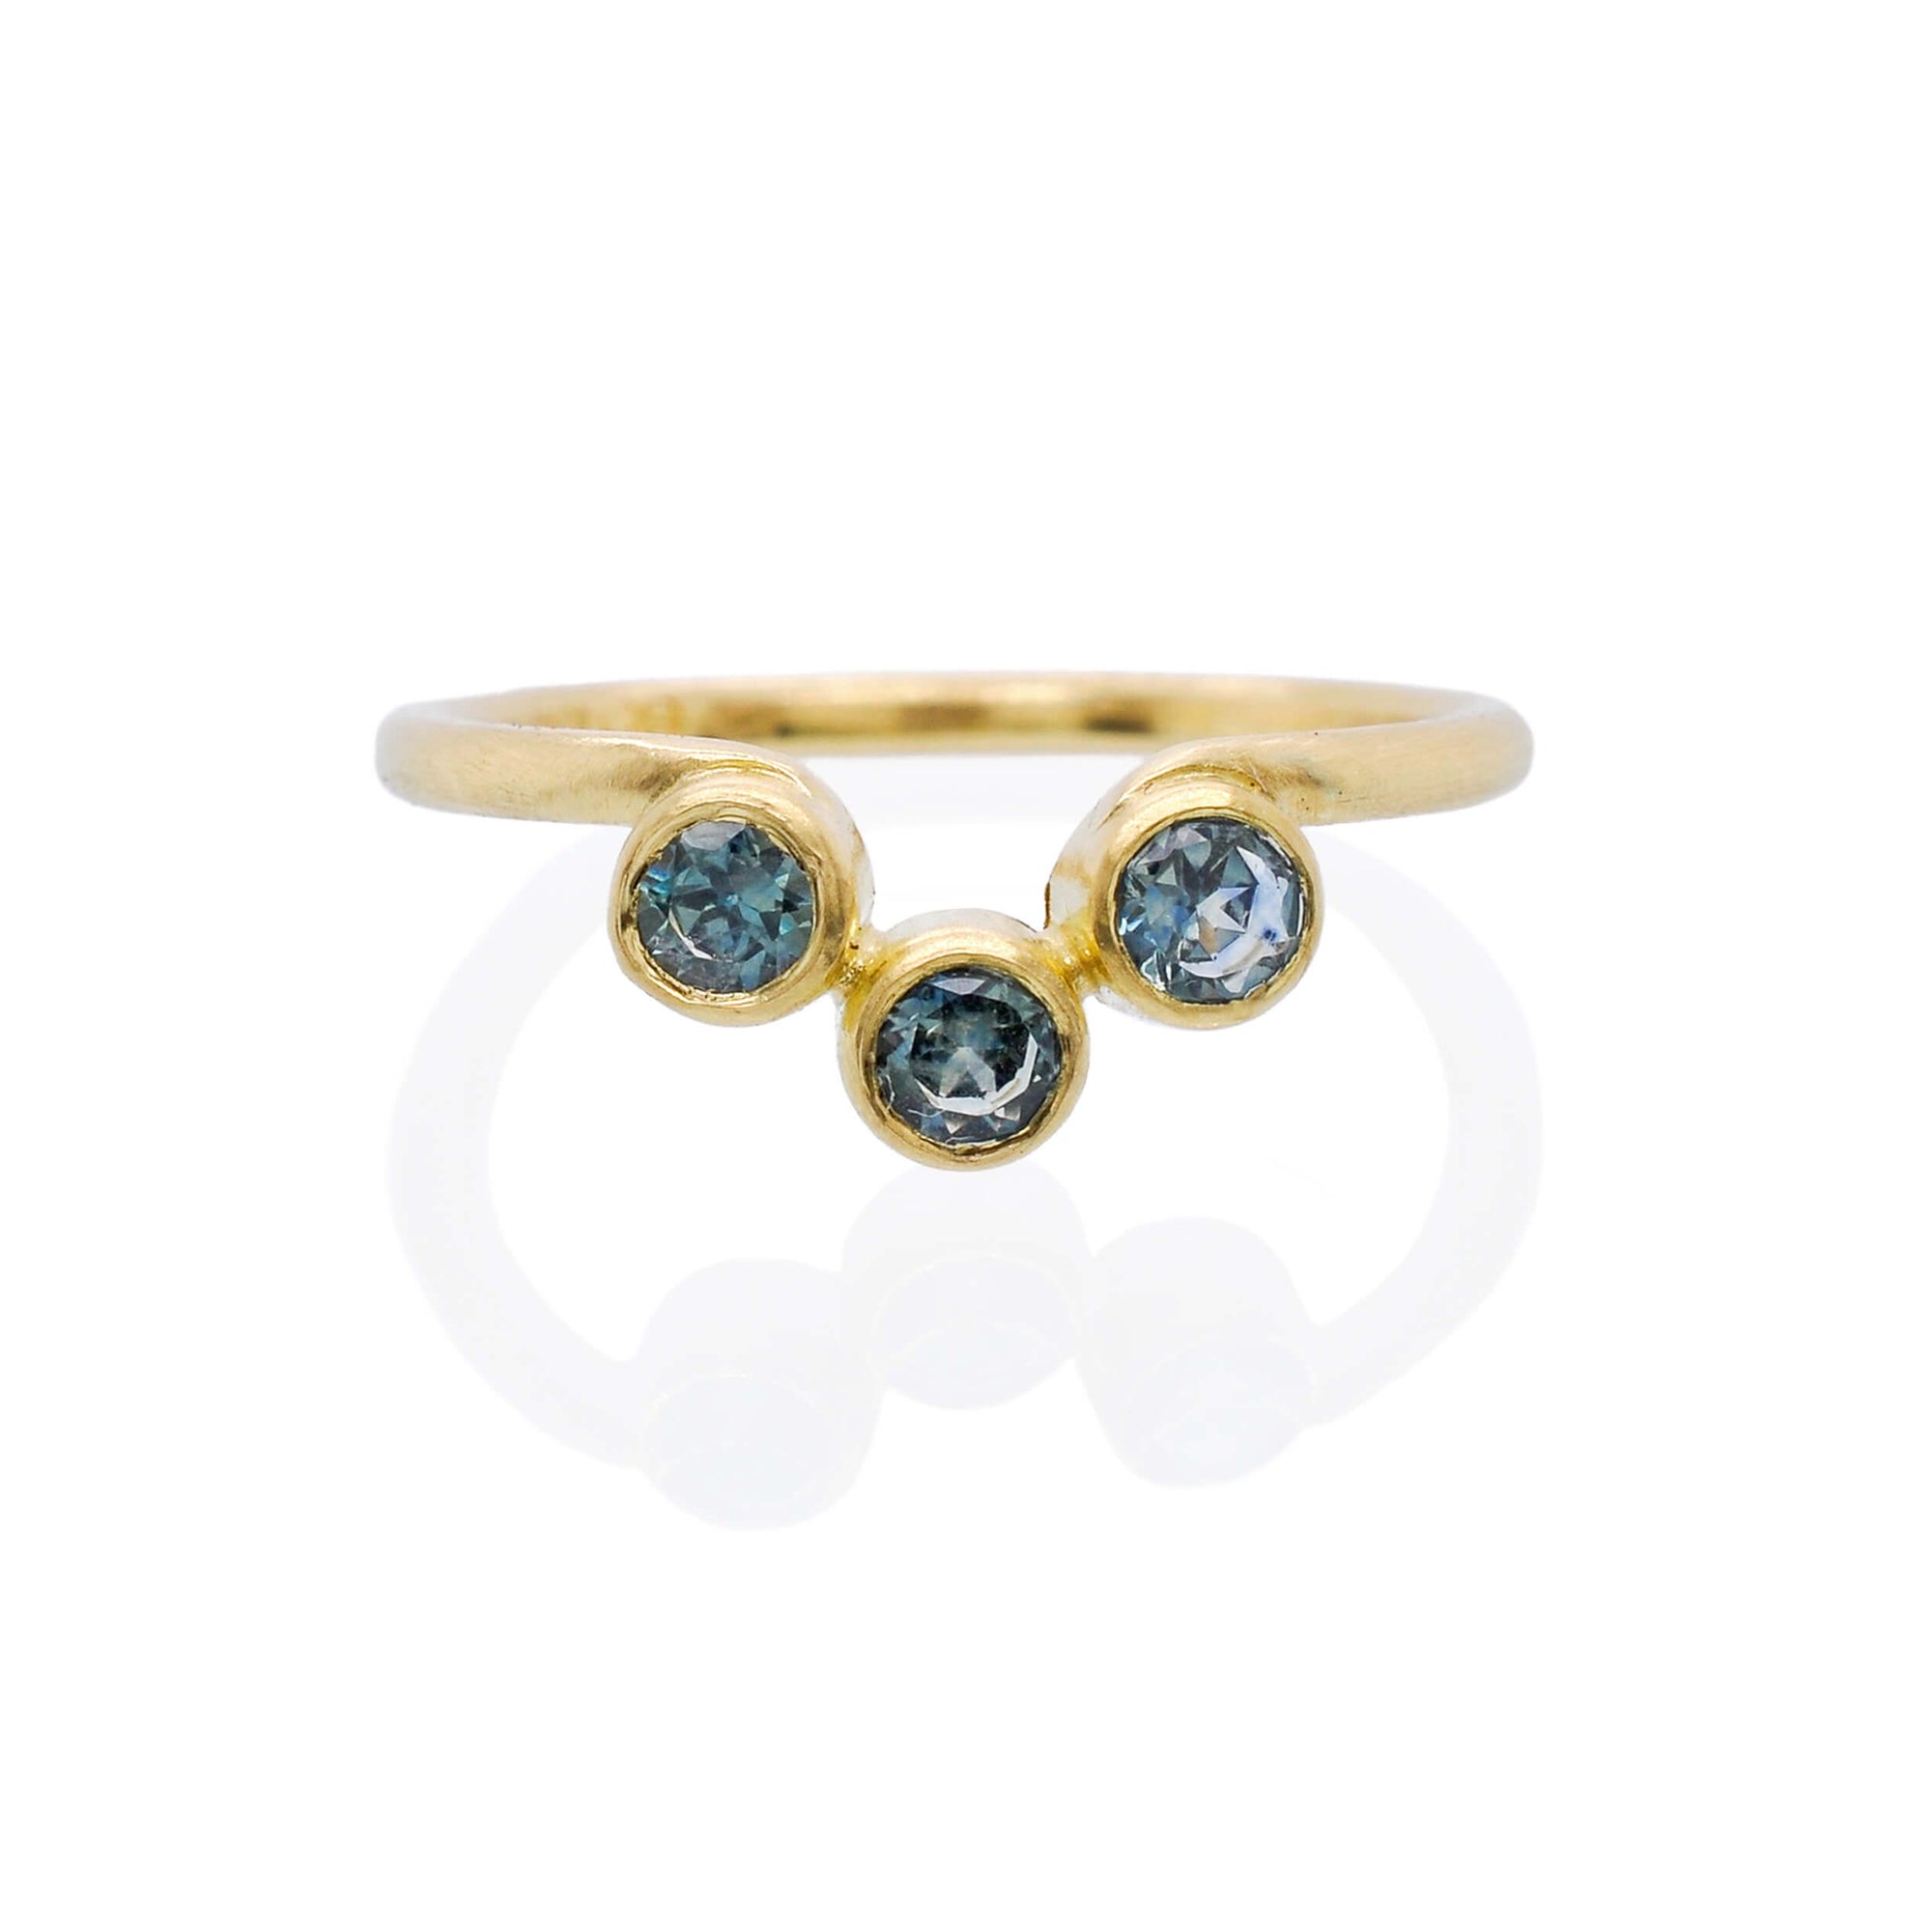 Yellow gold and blue Montana sapphire contour wedding band. Handmade by EC Design Jewelry in Minneapolis, MN using recycled metal and conflict-free stones from Montana.